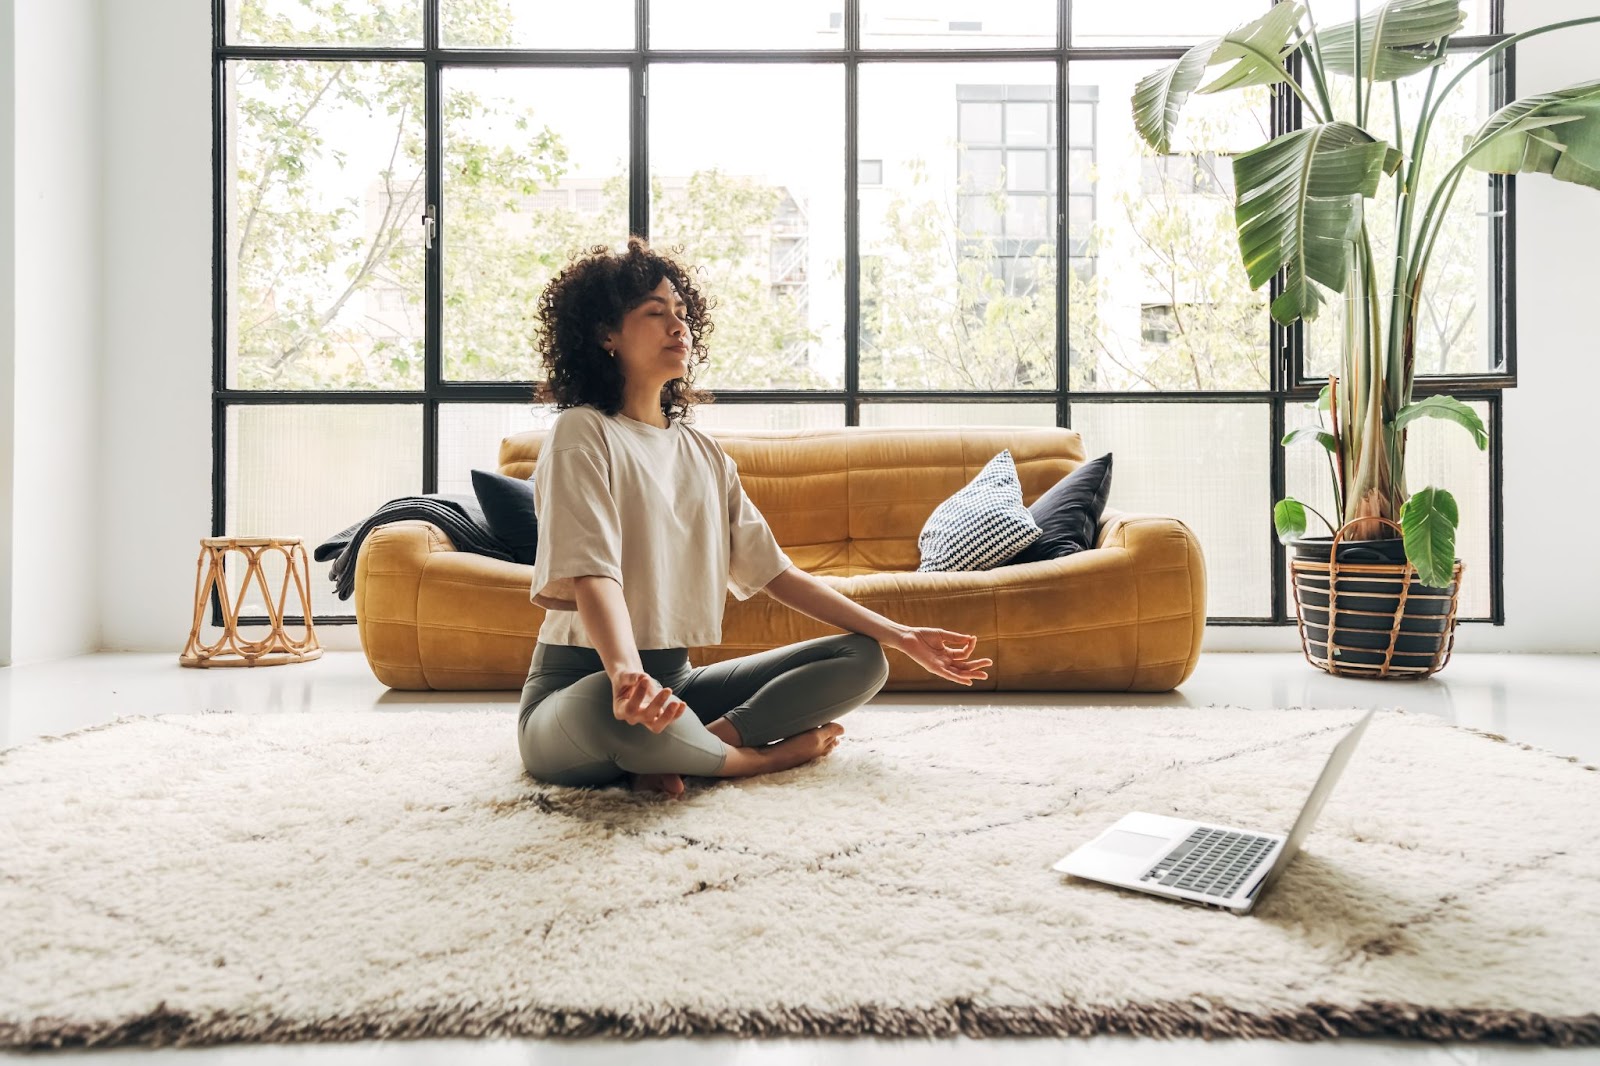 Woman meditating on a rug, finding peace amid anxiety and TMS therapy